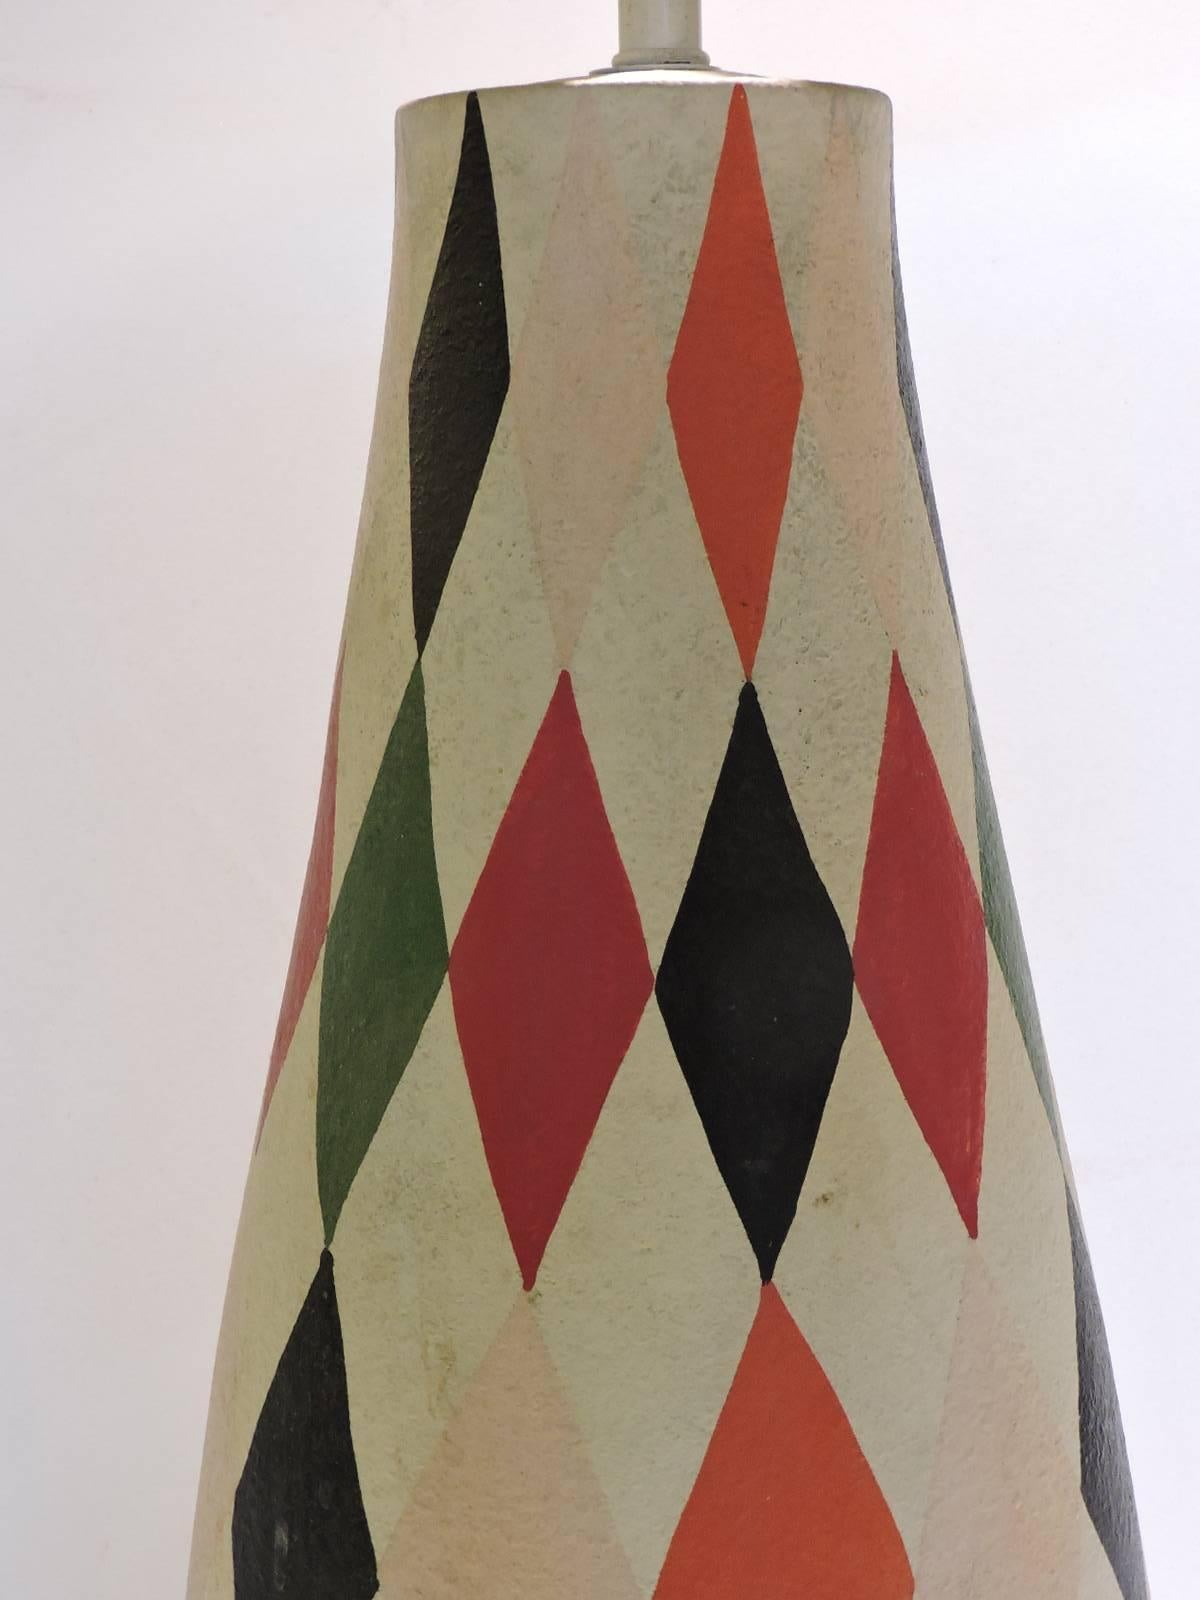 A polychrome painted large scale plaster table lamp with an all over harlequin like diamond design. Circa 1950. This one is a show stopper. Look at all pictures and read condition report in comment section